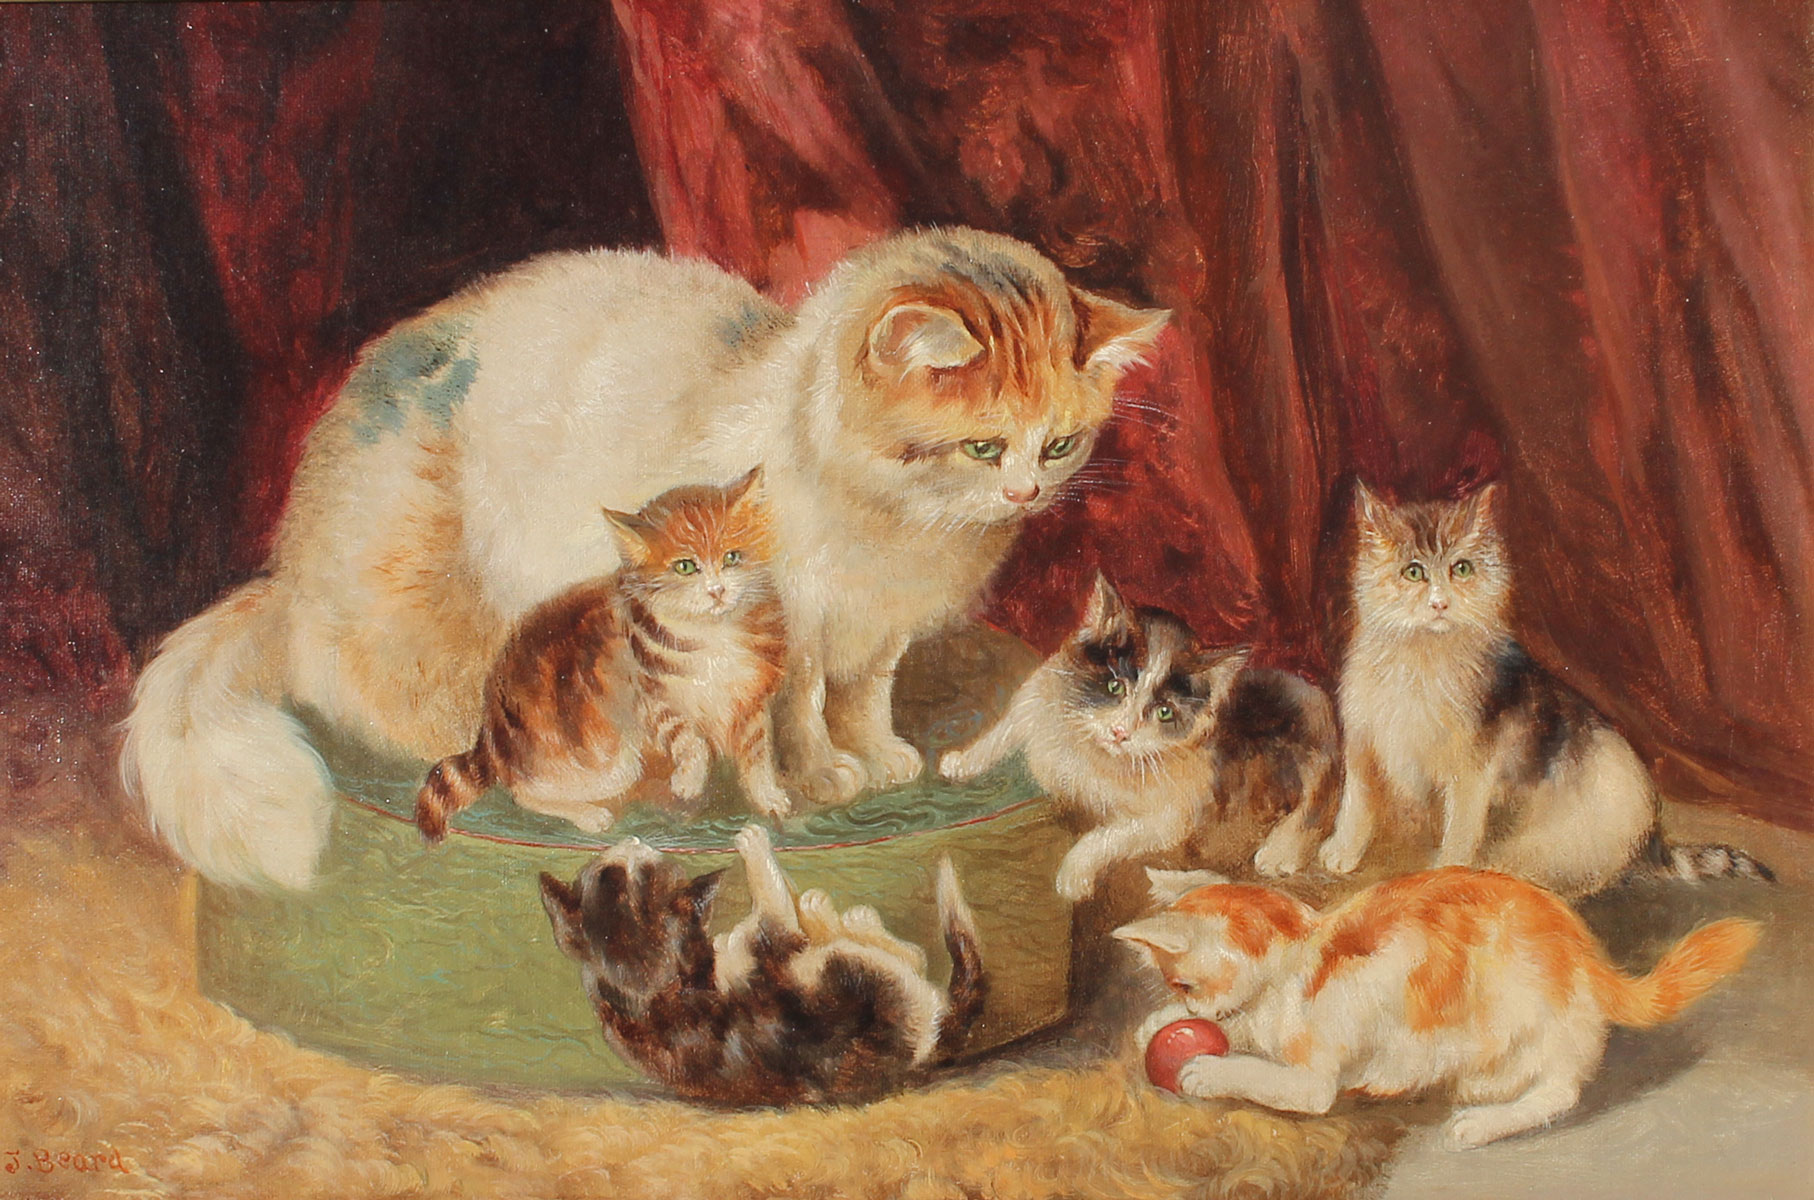 19TH CENTURY PAINTING OF A CAT